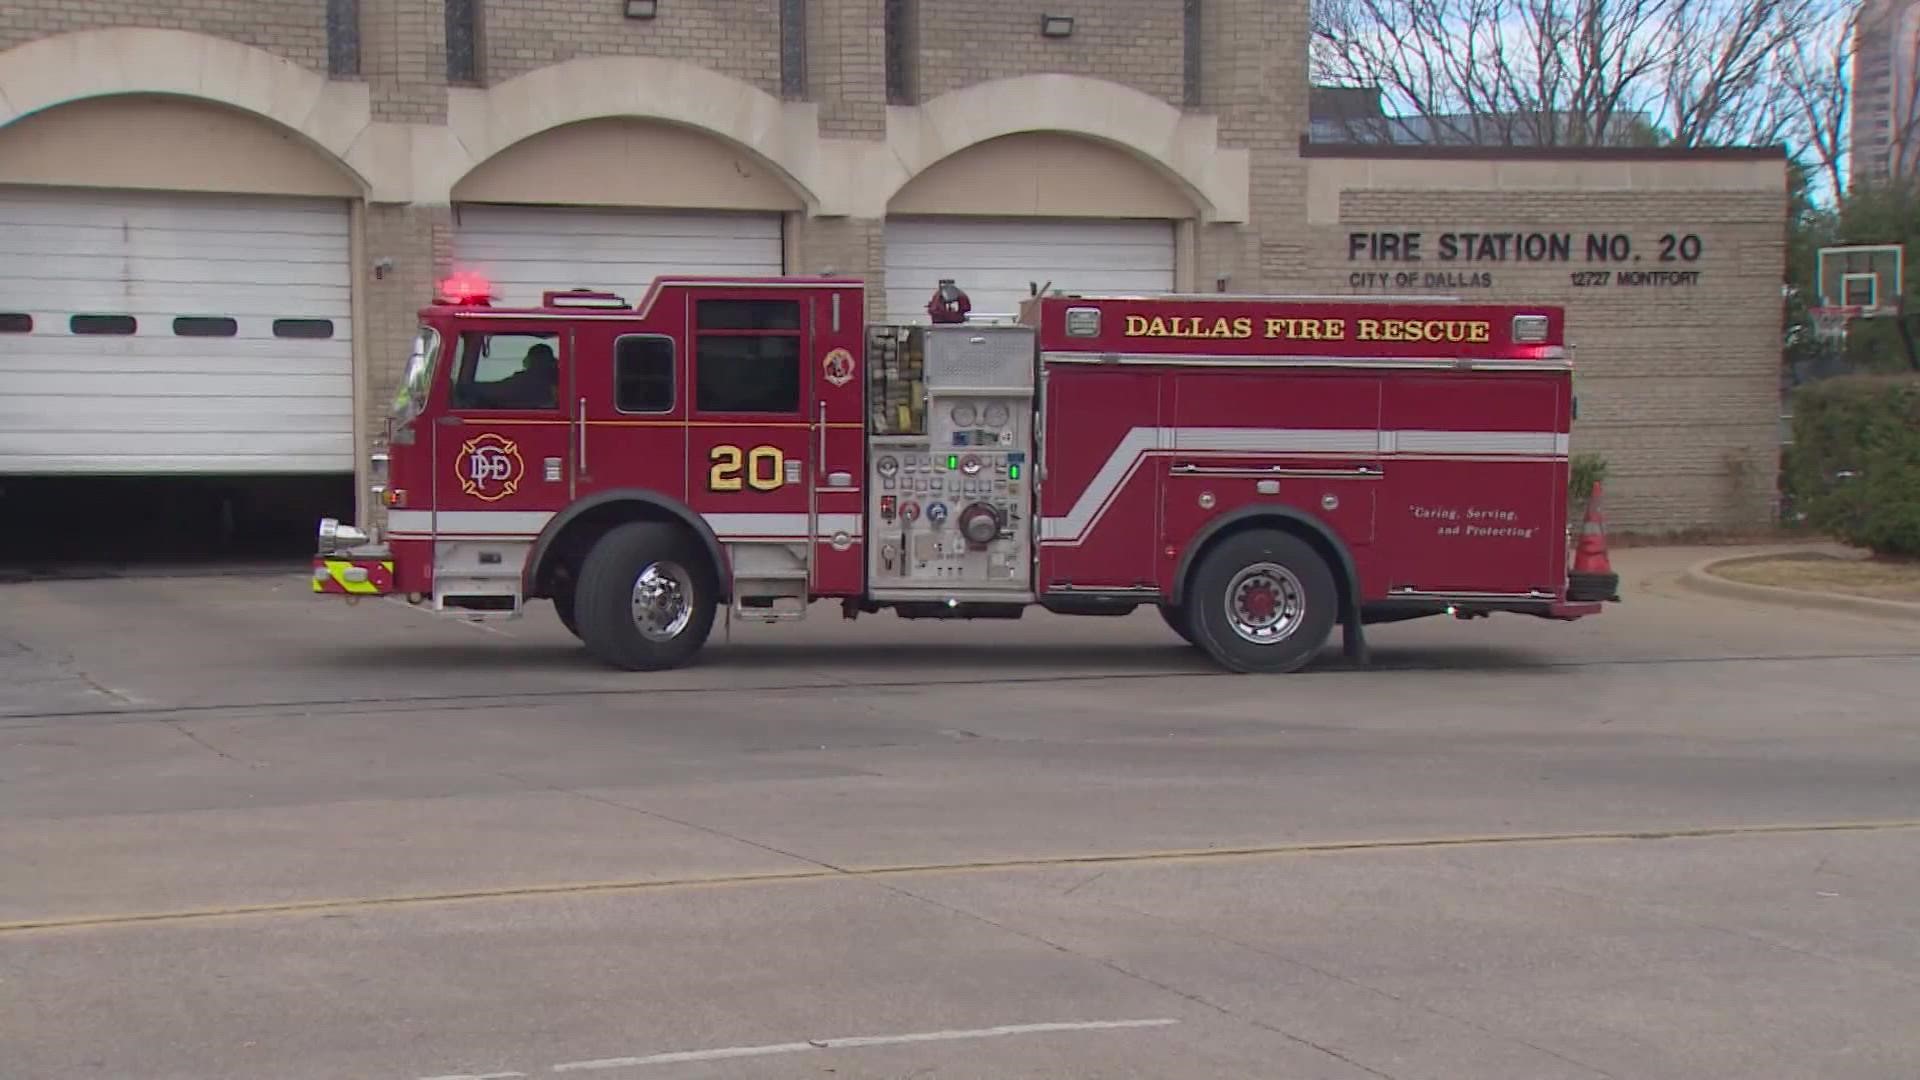 The fire department confirmed that Jesse McFall was arrested by Dallas Police on Tuesday, Jan. 17.